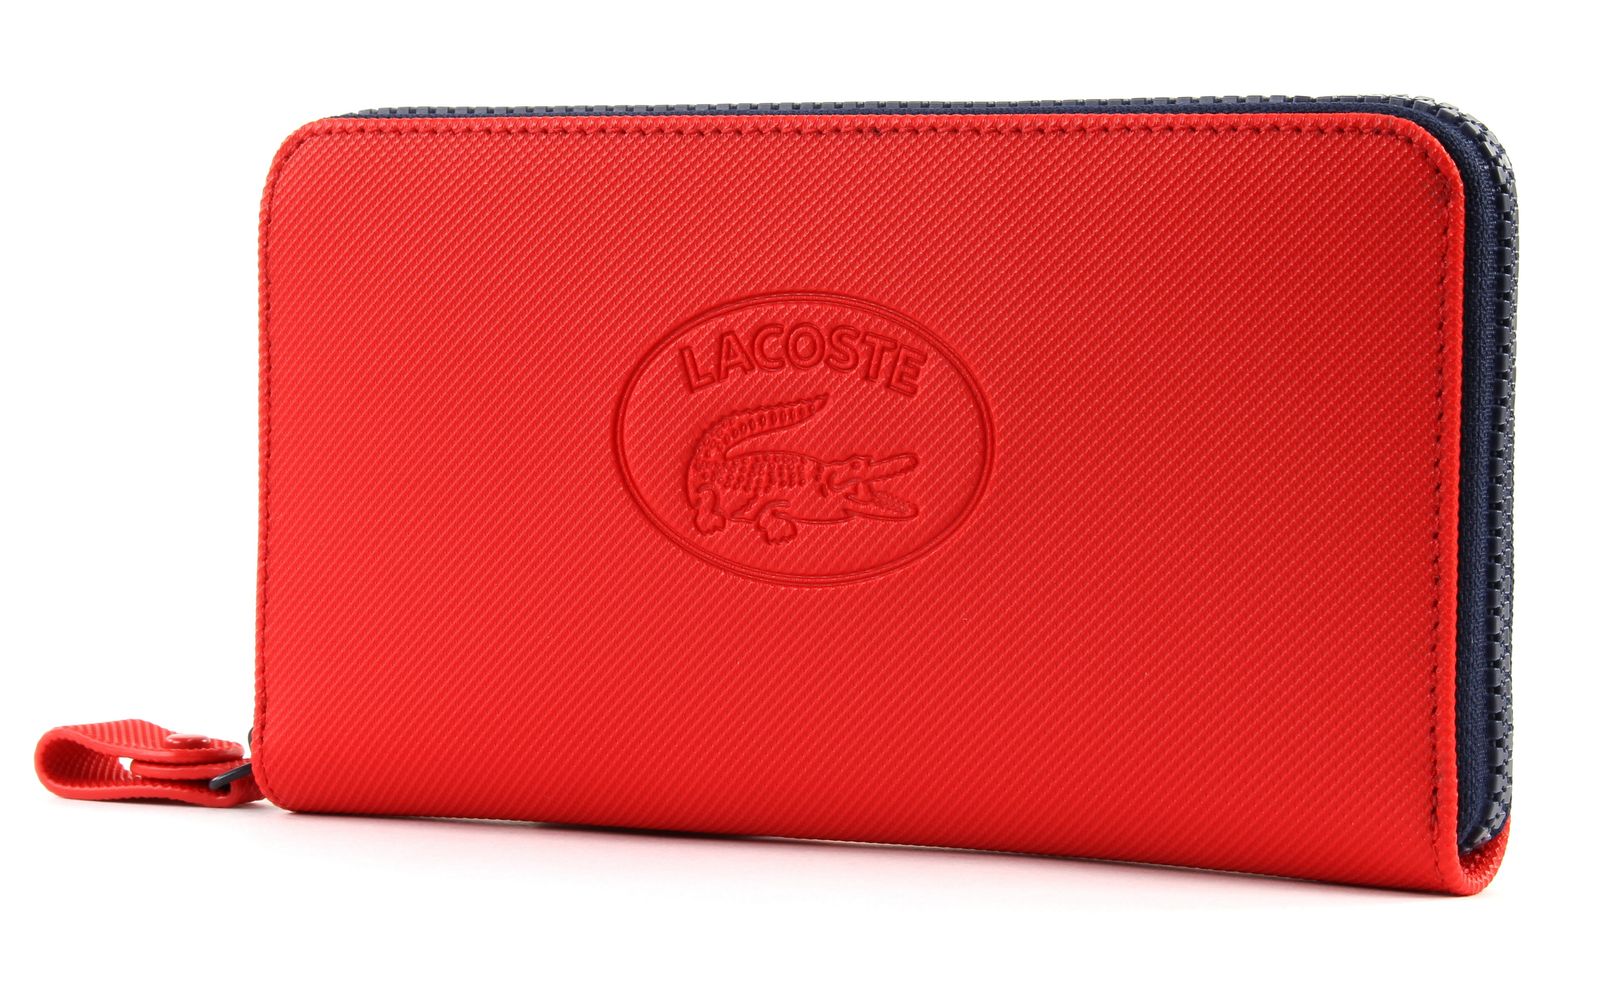 lacoste red wallet